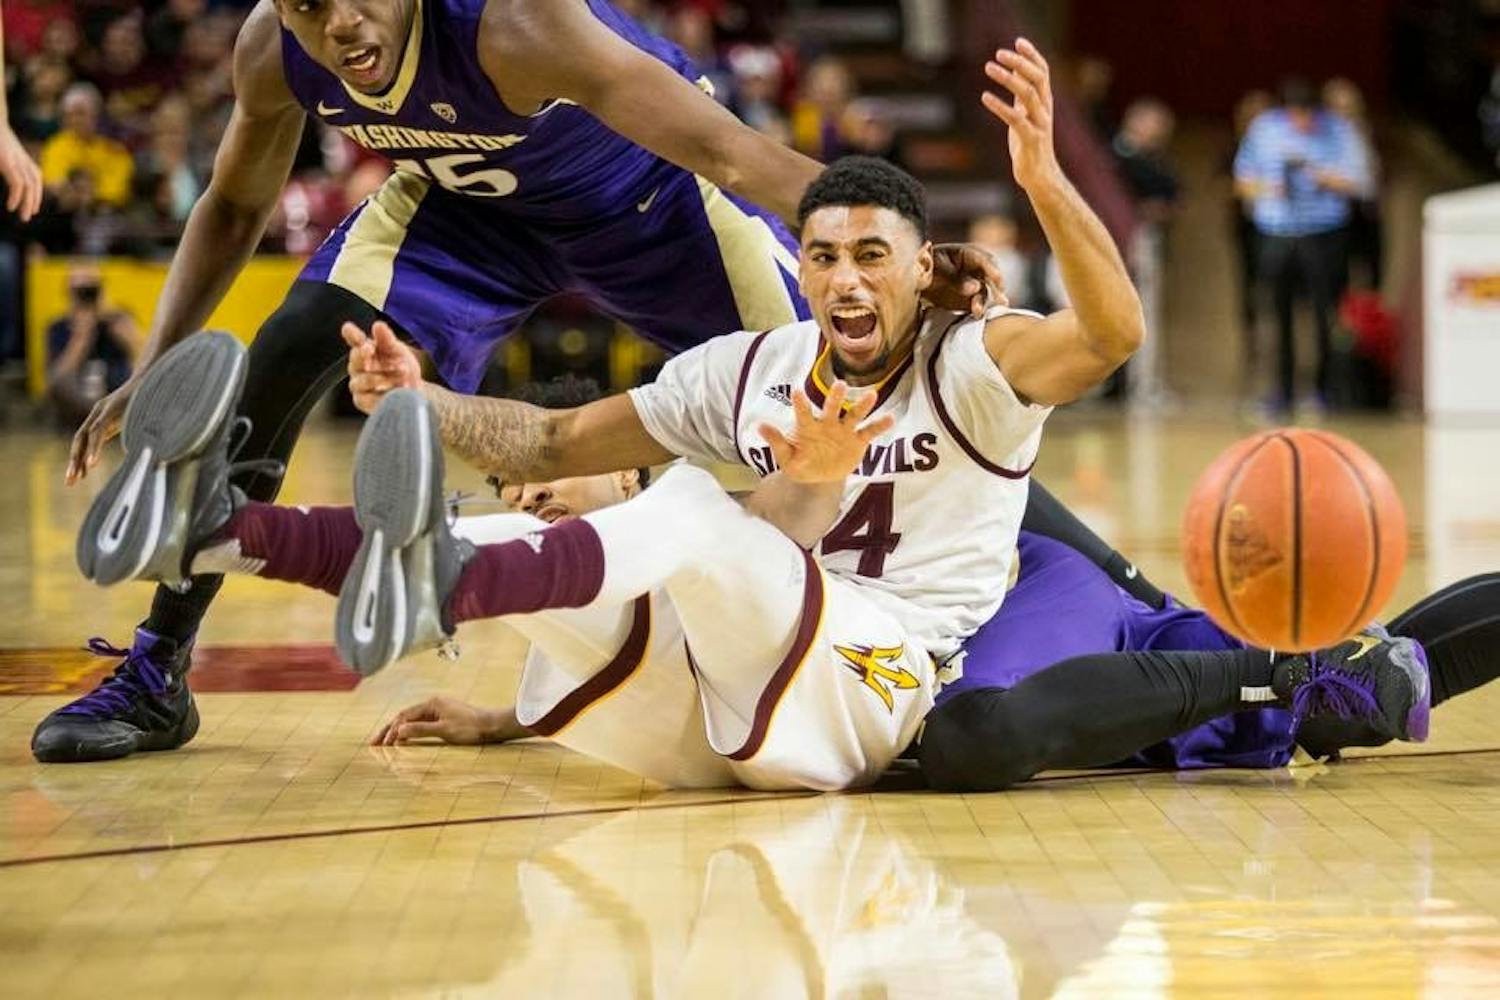 Andre Spight fights for the loose ball against Washington on Saturday, January 16, 2016 at Wells Fargo Arena in Tempe. ASU would lose the game 89-85.